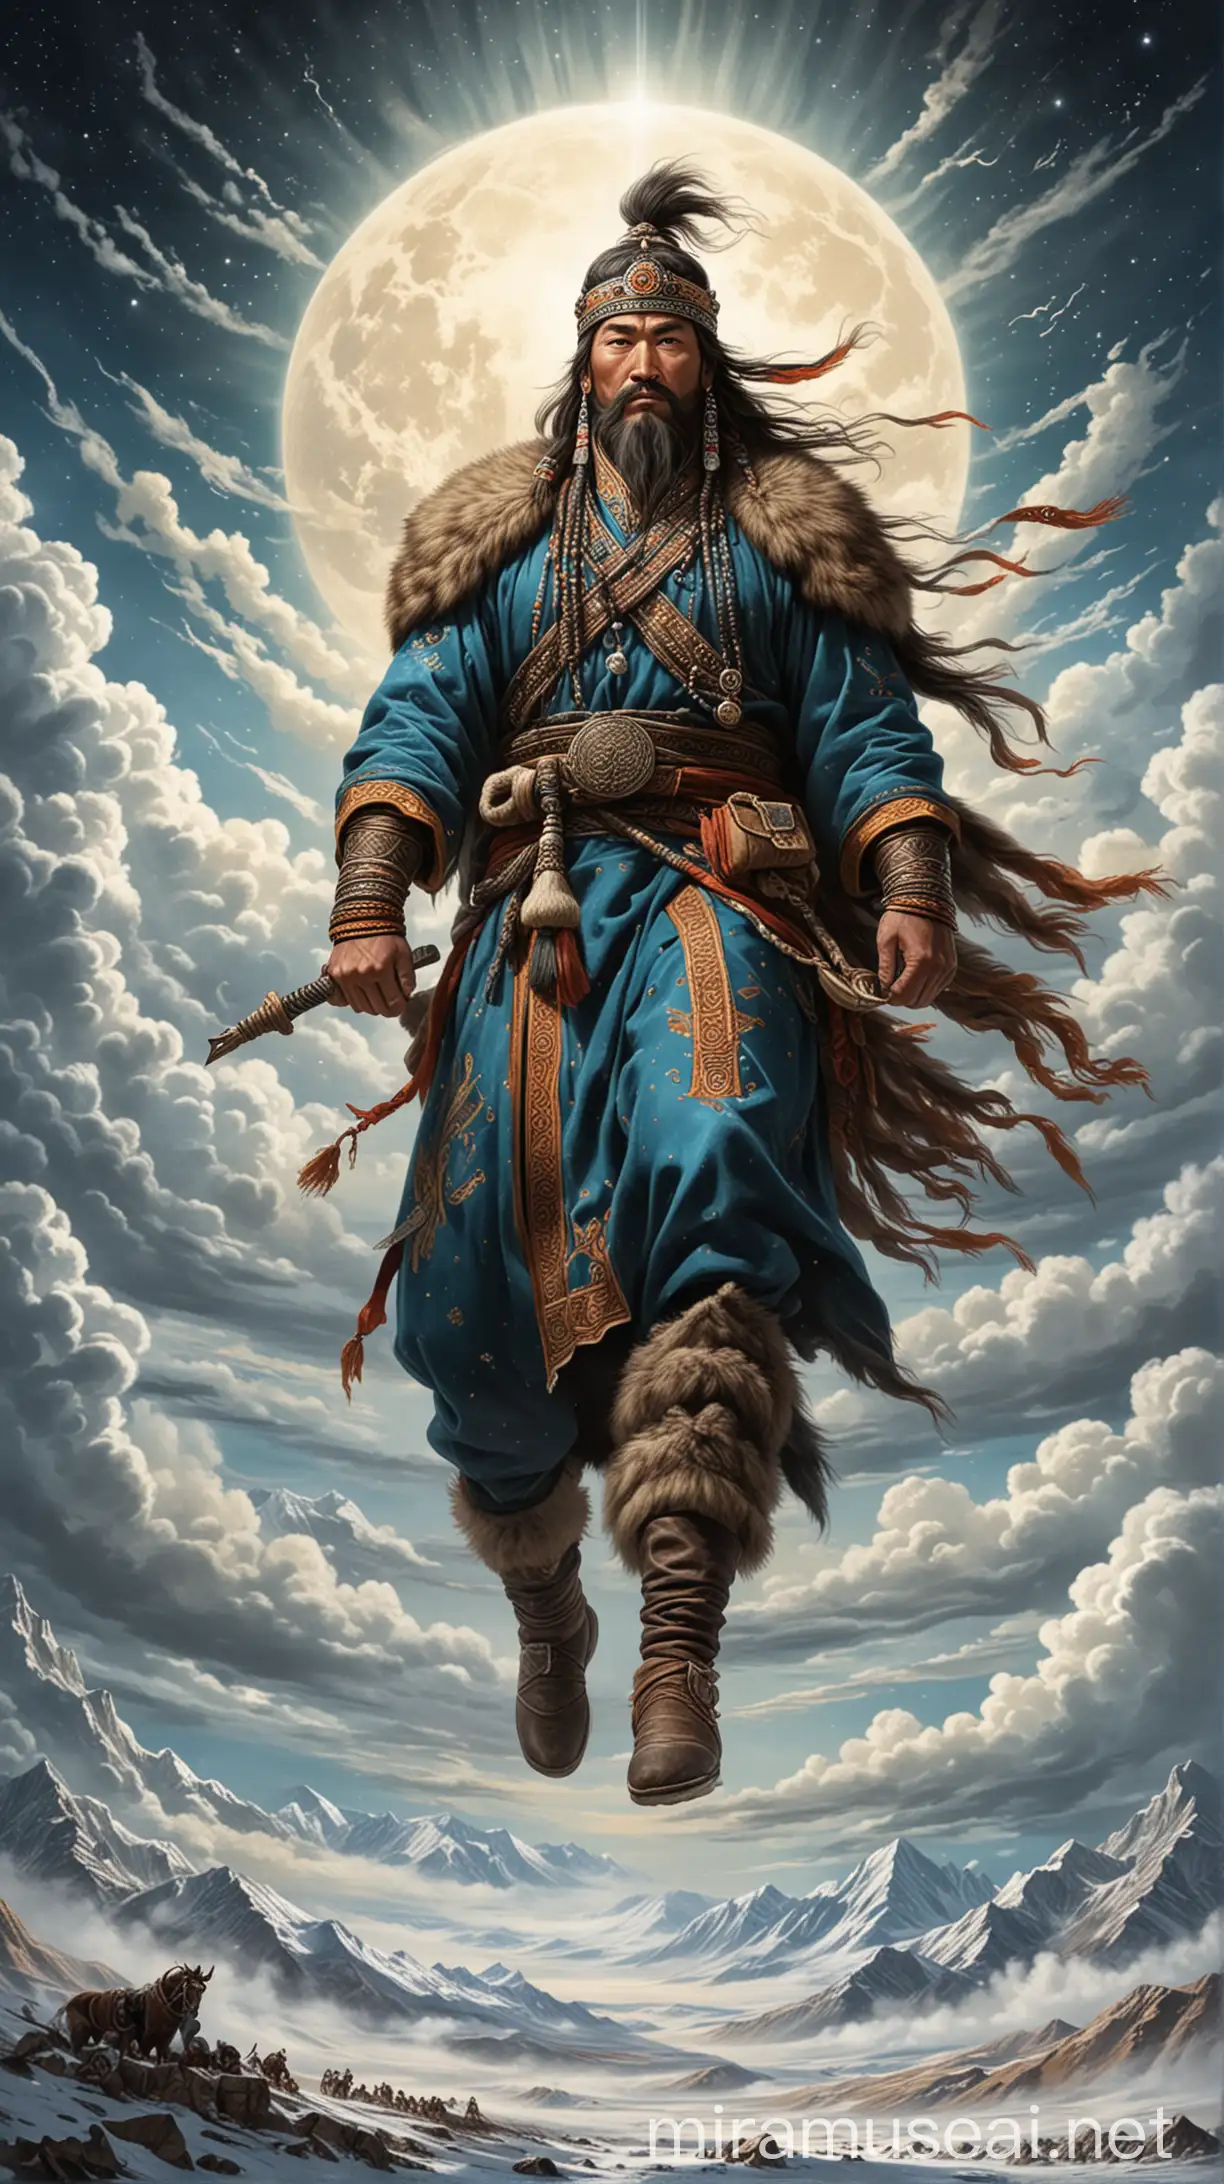 A visual representing Gök Tengri as symbolized by a Turkic or Mongolian tribe. Gök Tengri is often depicted as an elevated figure in the sky.